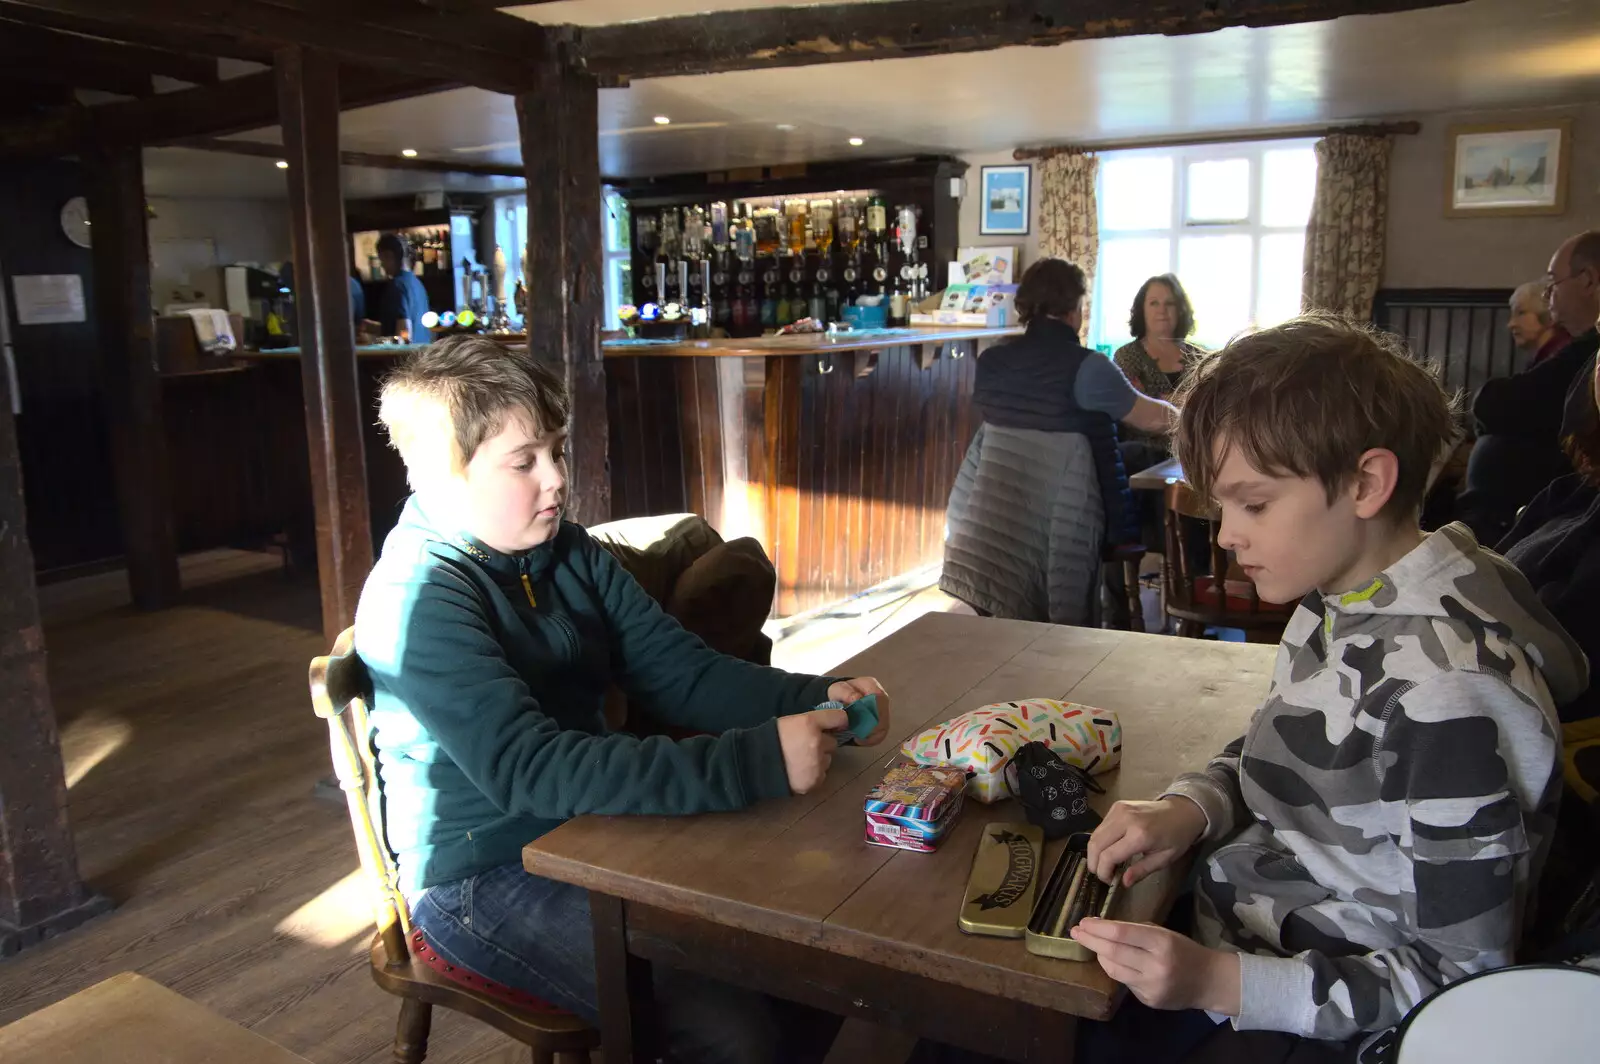 Fred does some origami, Harry does drawing, from A Trip to Orford Castle, Orford, Suffolk - 26th February 2022